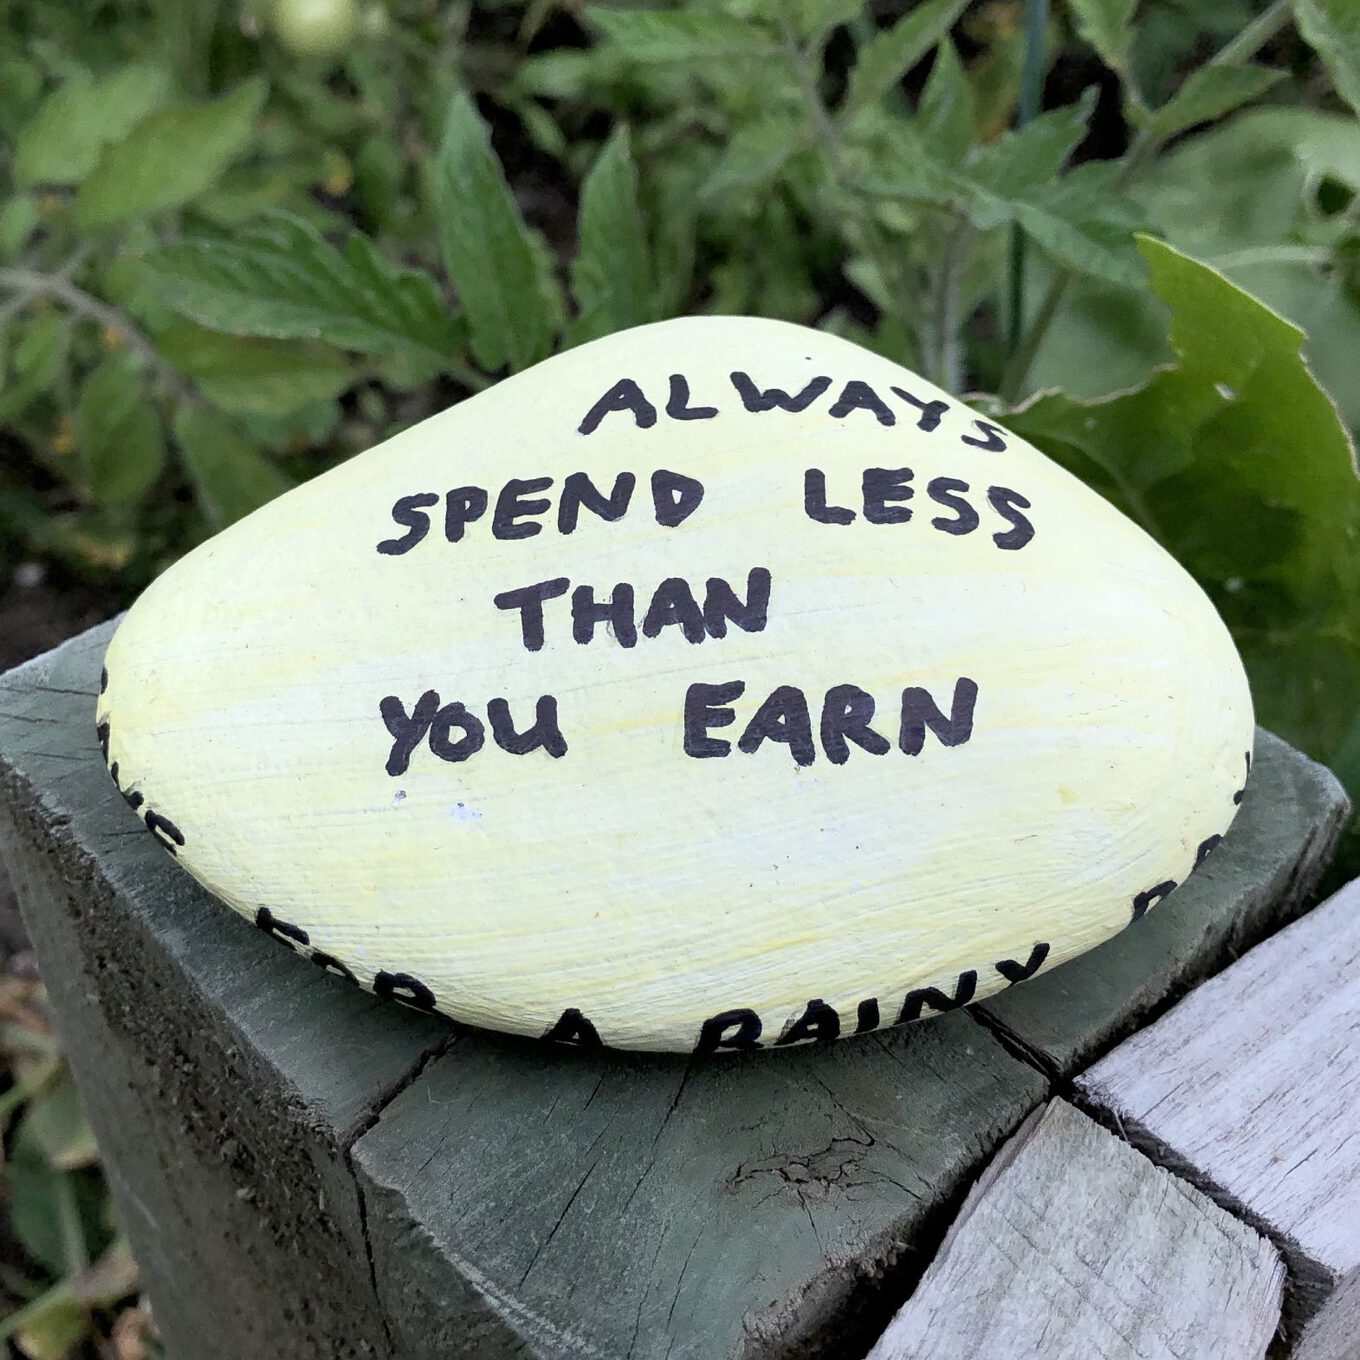 A painted rock that says "Always spend less than you earn"